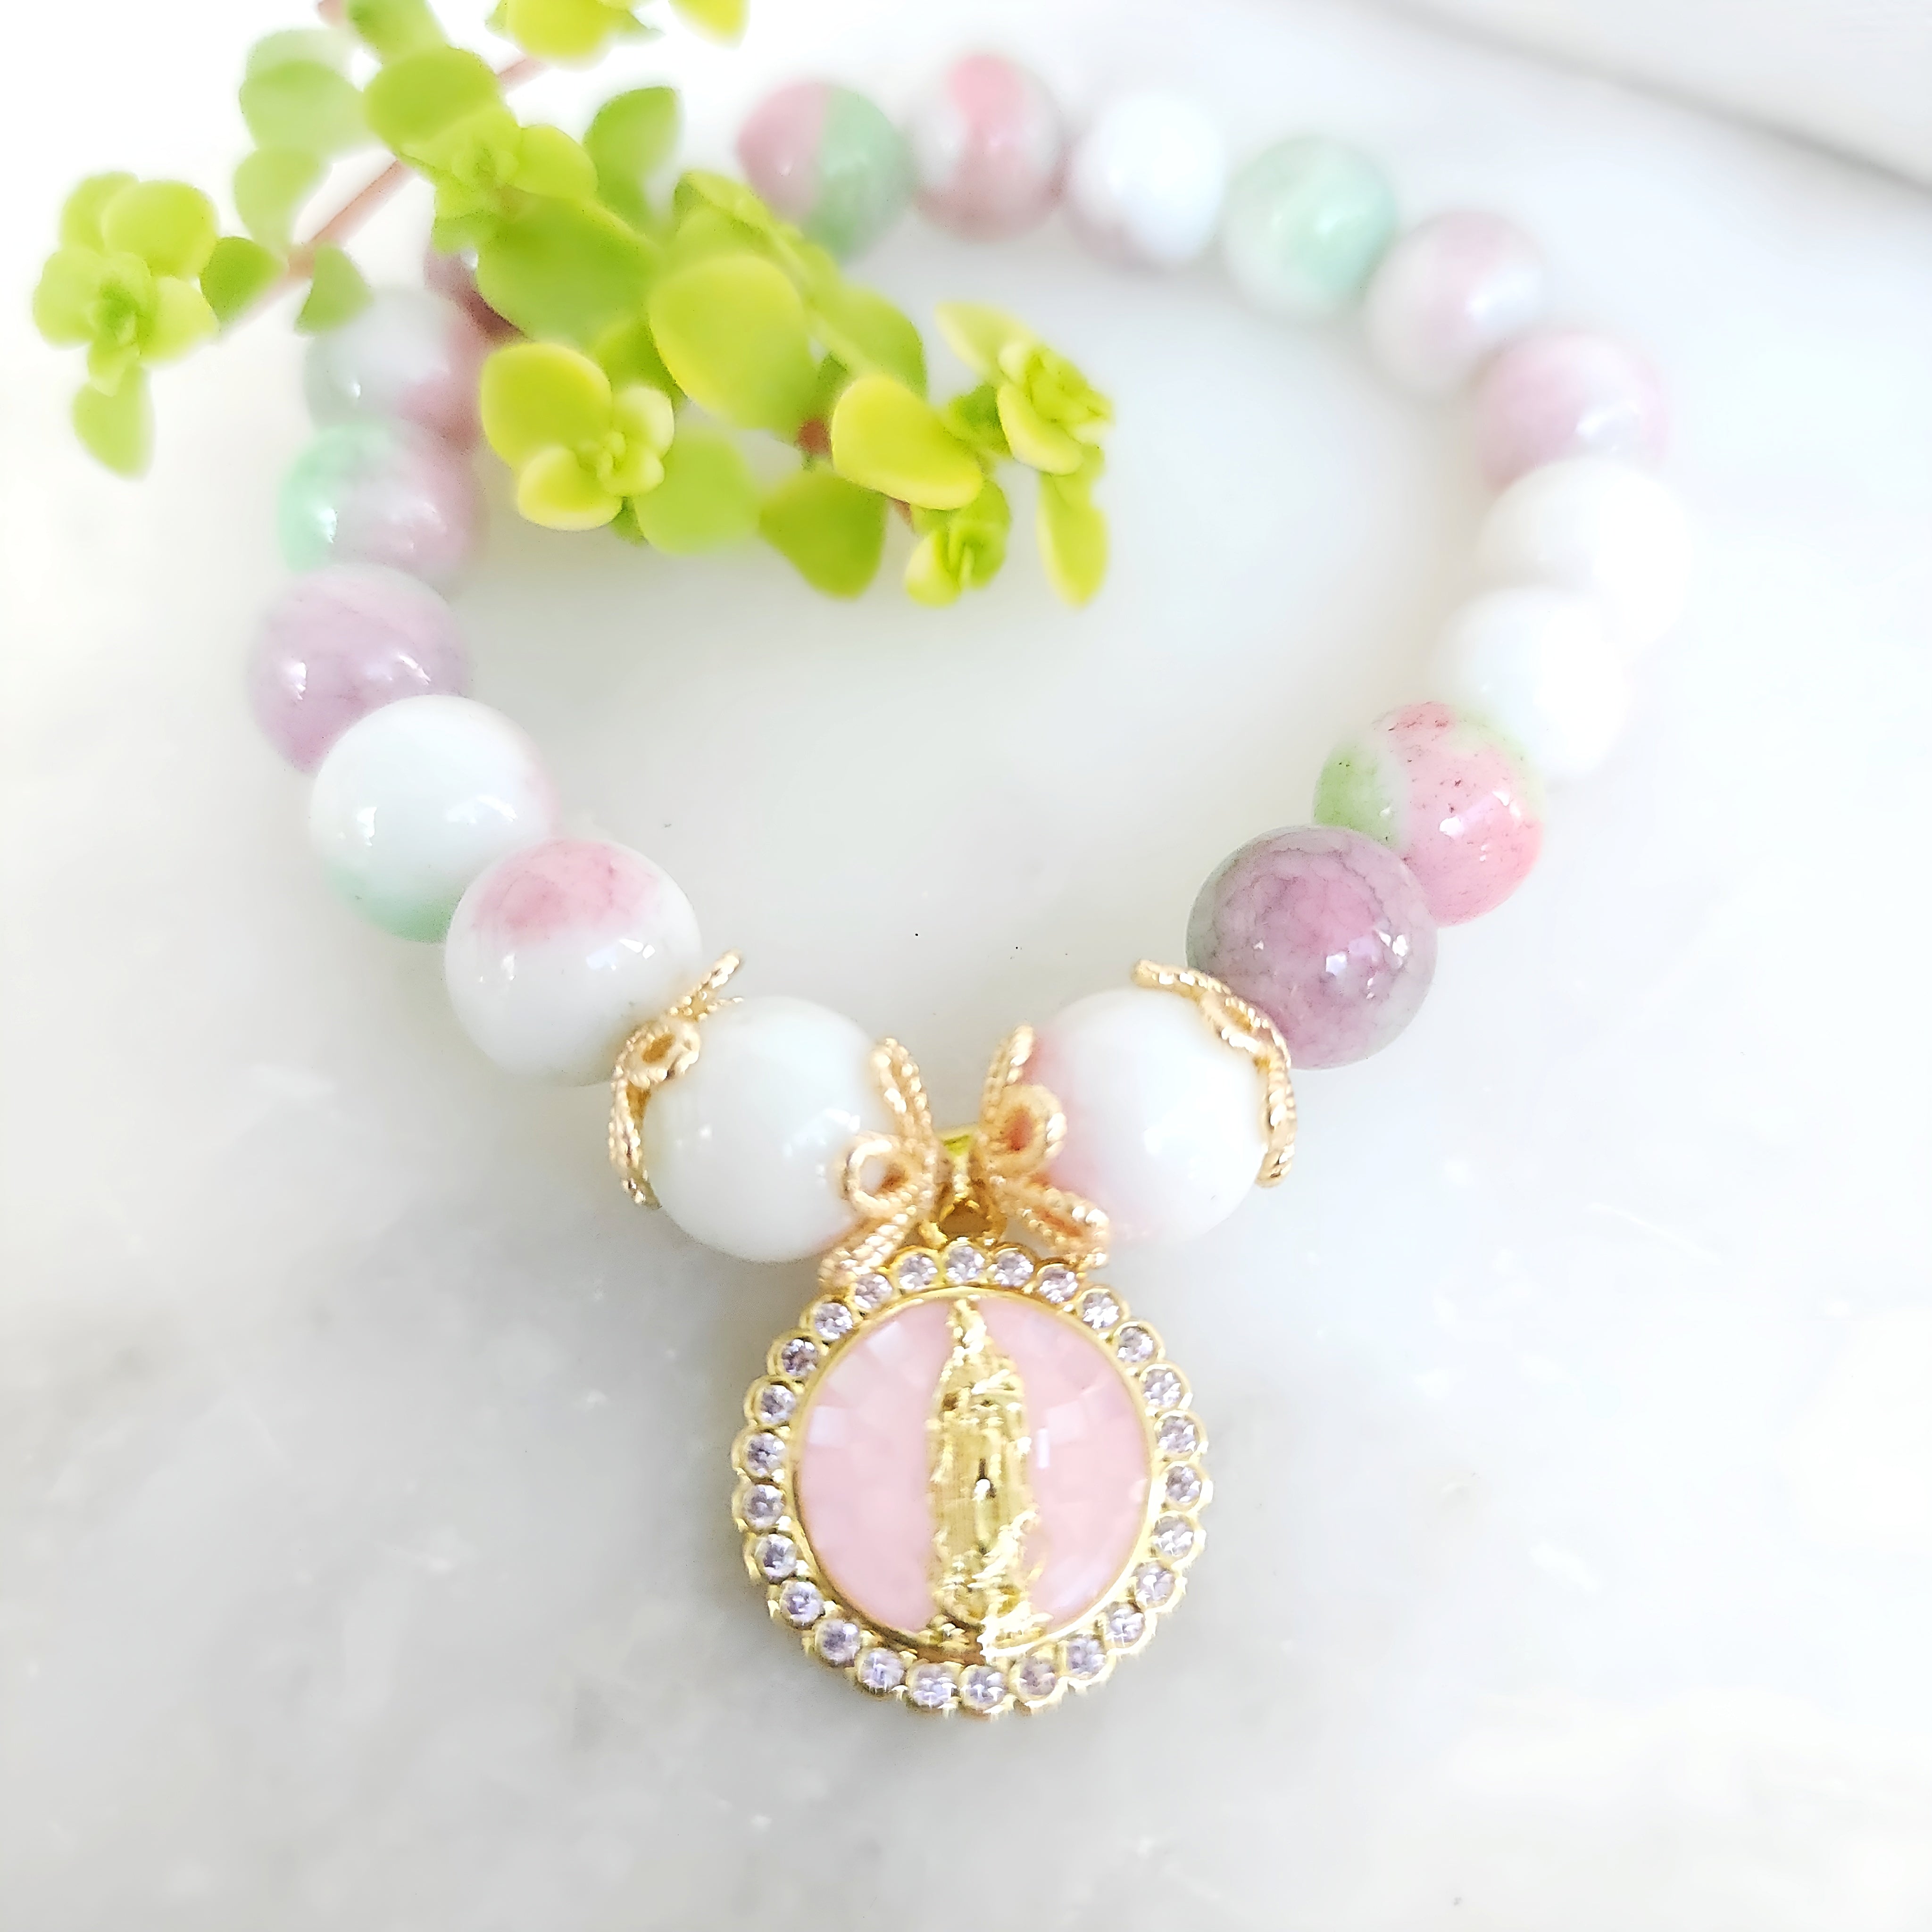 Mary's Spirit Pink and Green bead bracelet